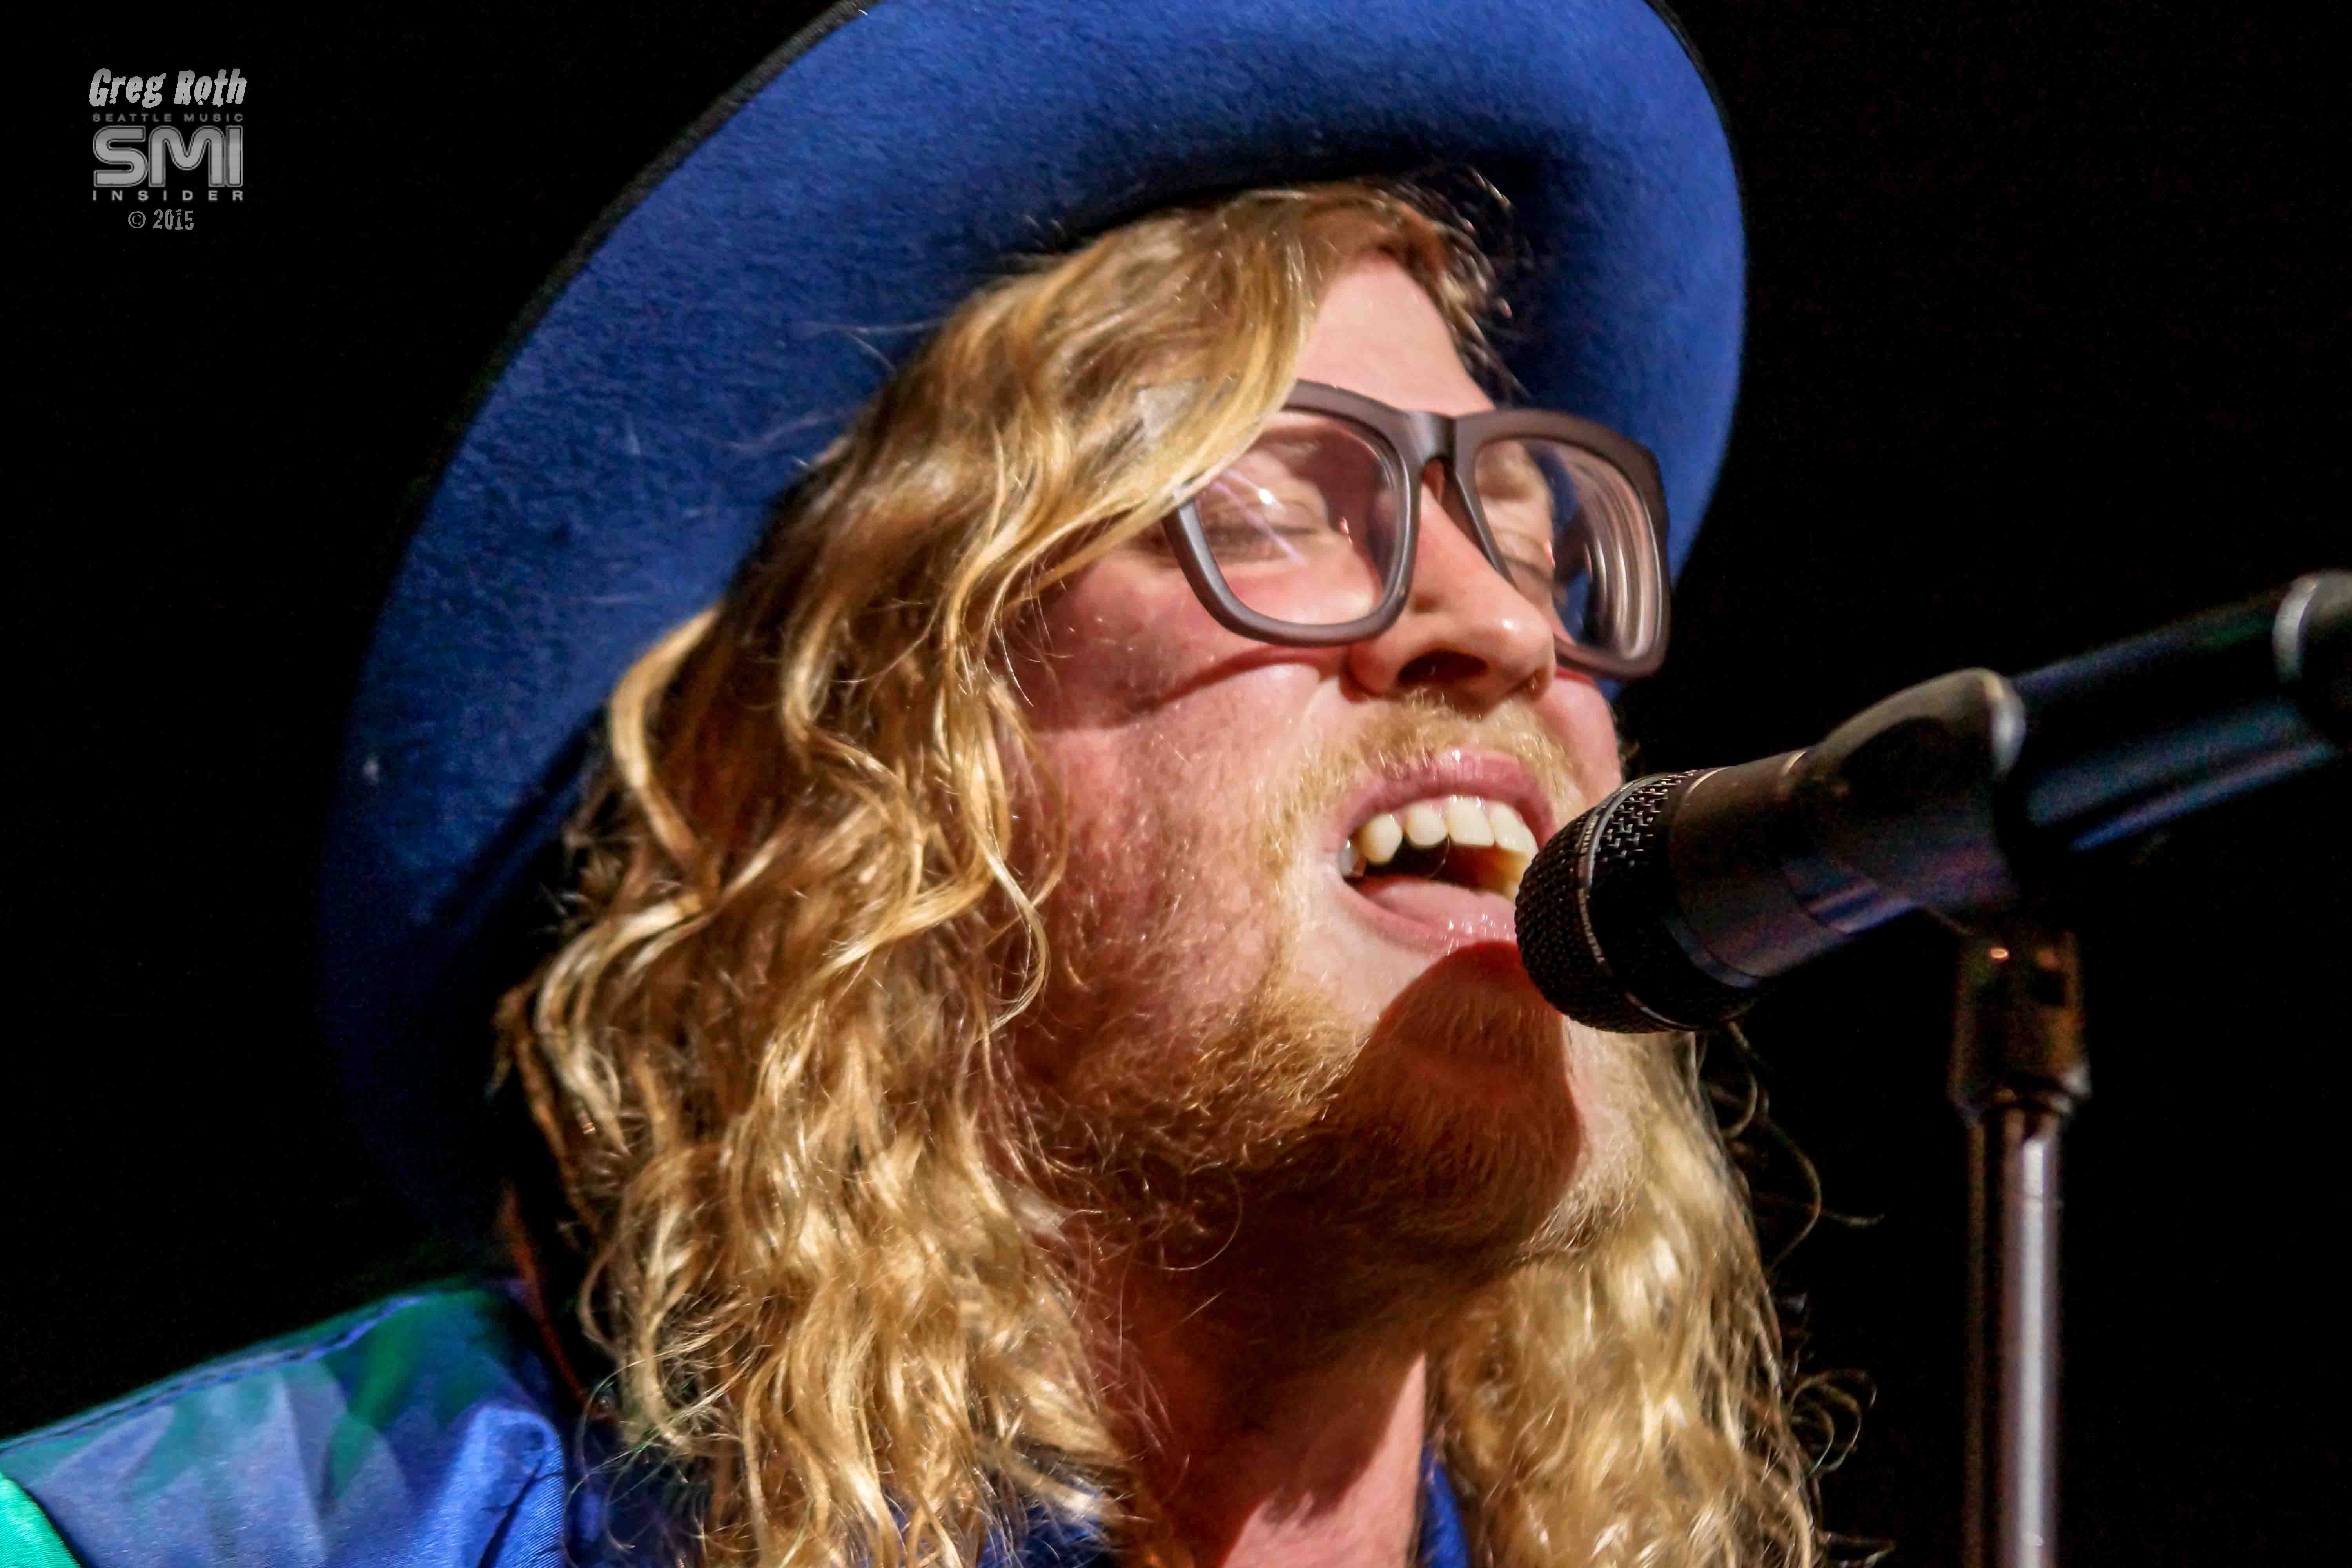 Allen Stone Live @ The Paramount – 4/18/15 (Photo by Greg Roth)